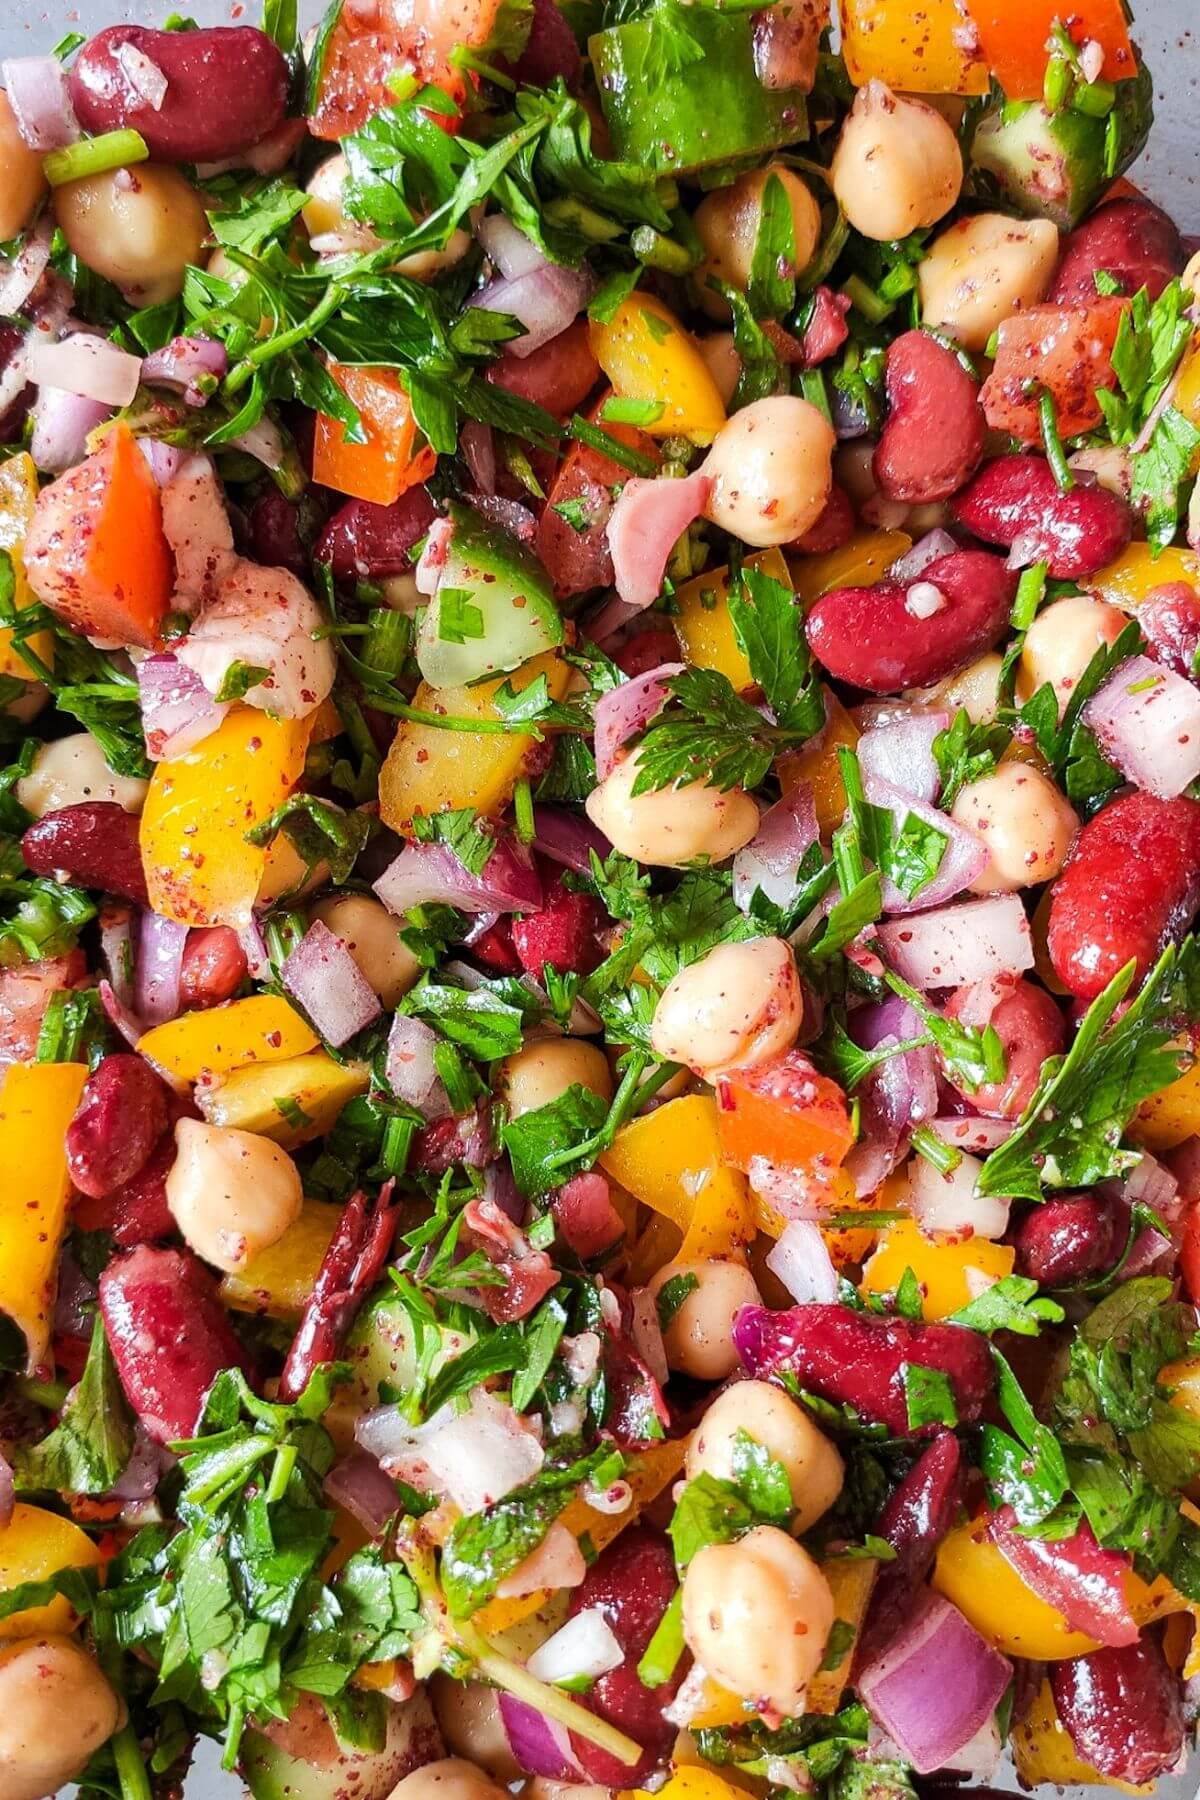 Middle eastern bean salad garnished with fresh herbs.